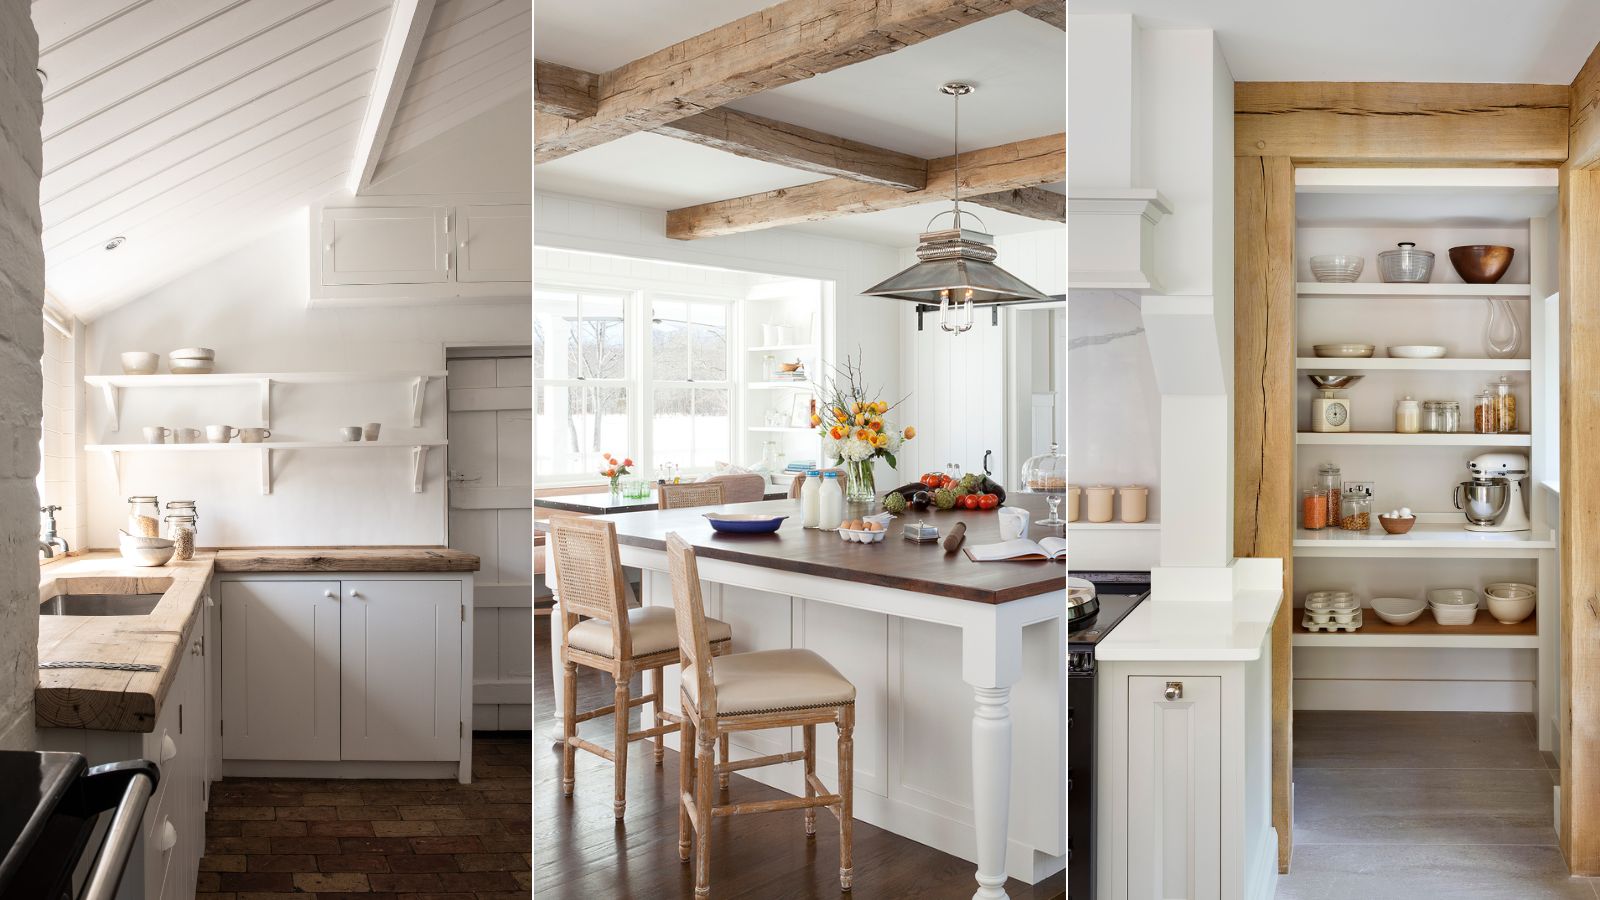 20 Modern Farmhouse Kitchens With Rustic Flare